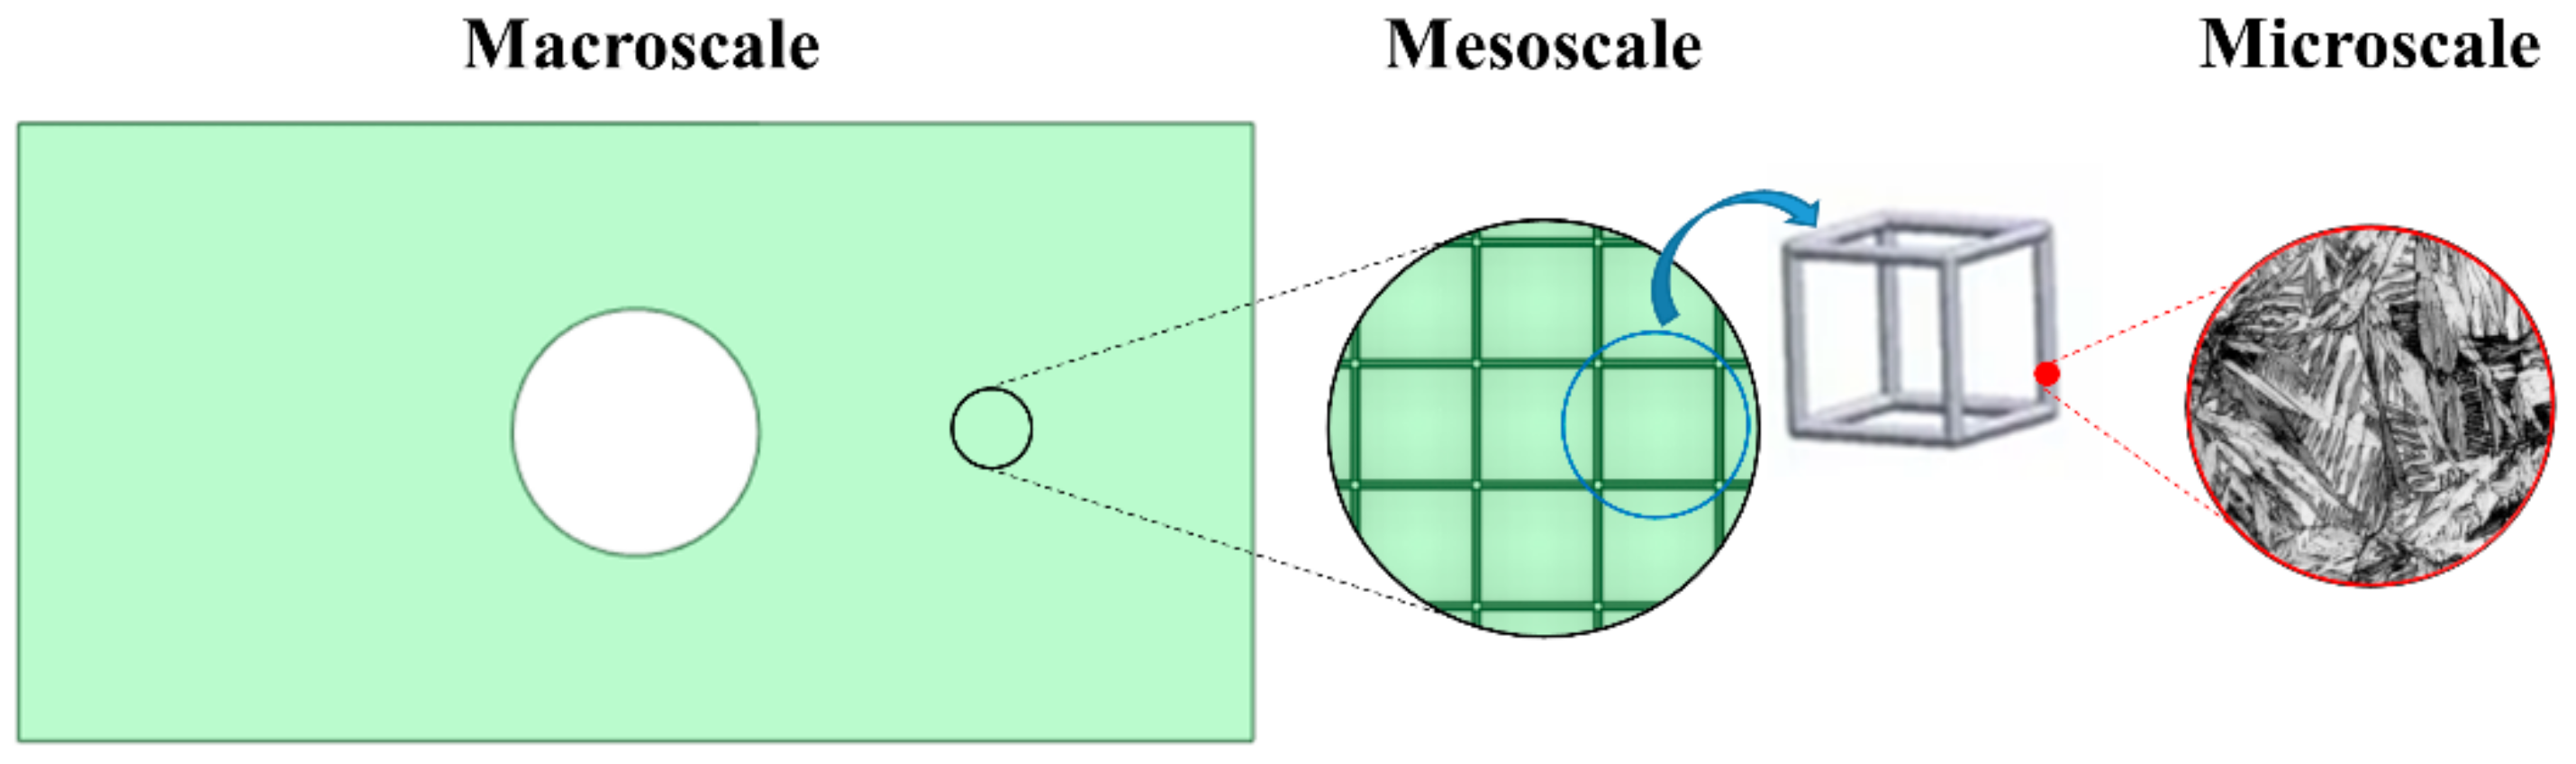 Food structuring is a multiscale problem, with micro-and macroscale